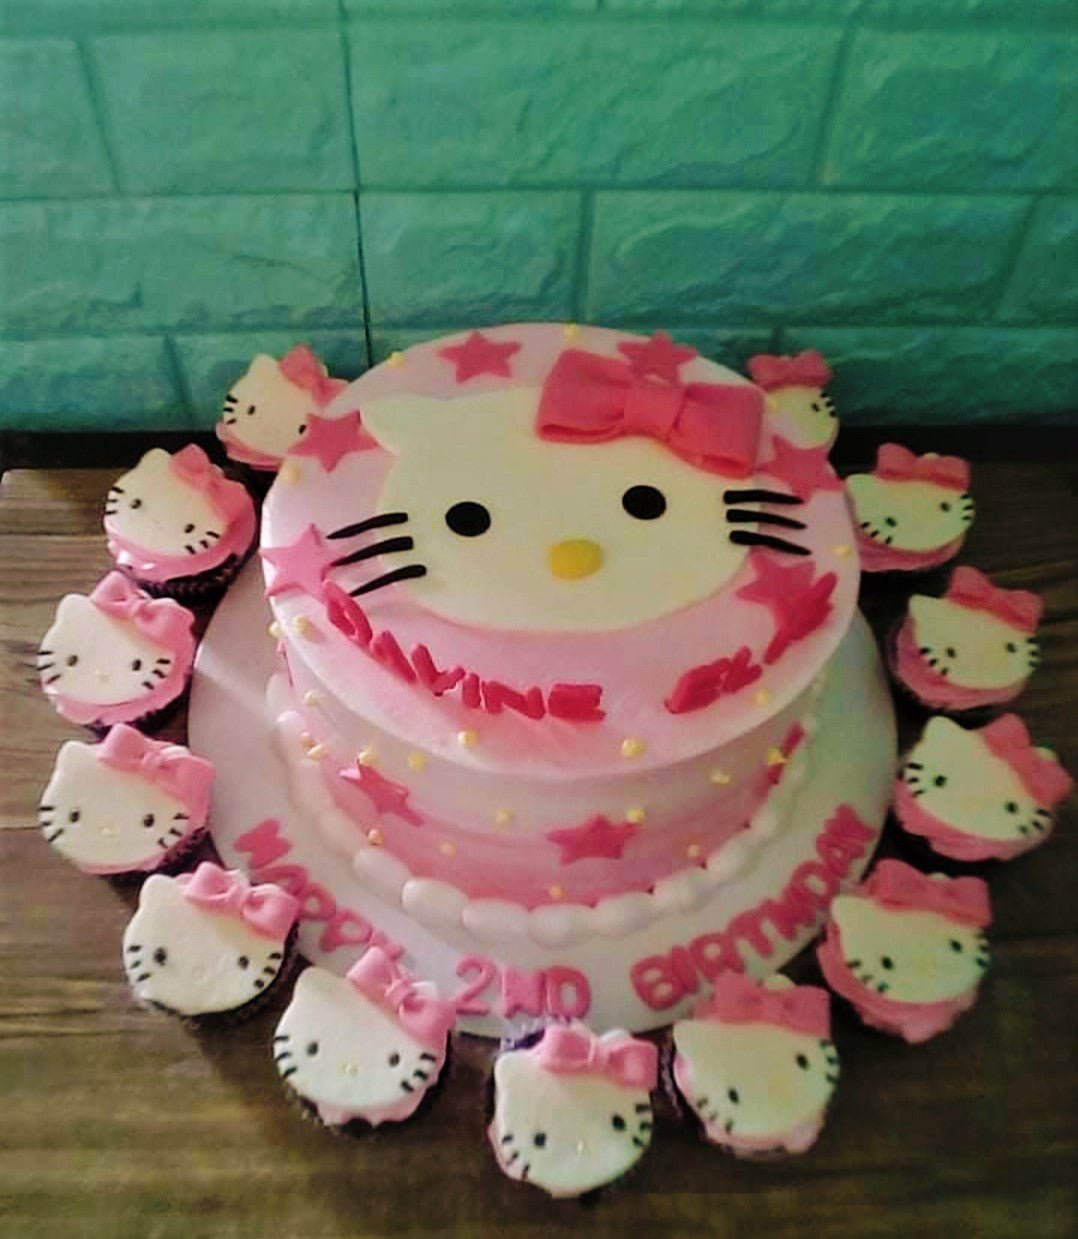 Cute hello kitty cake decorating ideas for a fun and playful cake